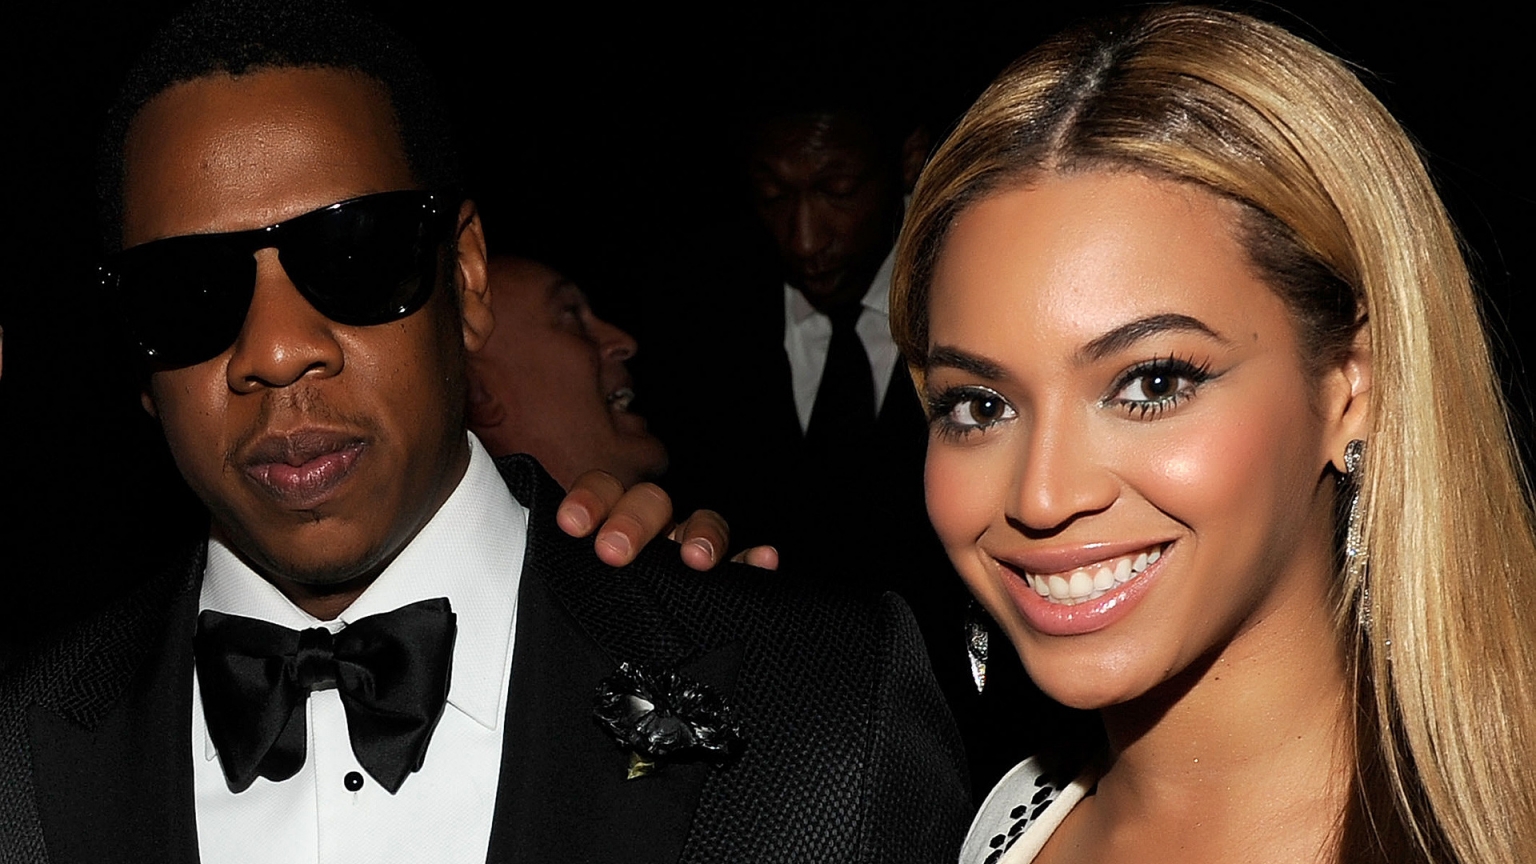 Jay Z and Beyonce for 1536 x 864 HDTV resolution